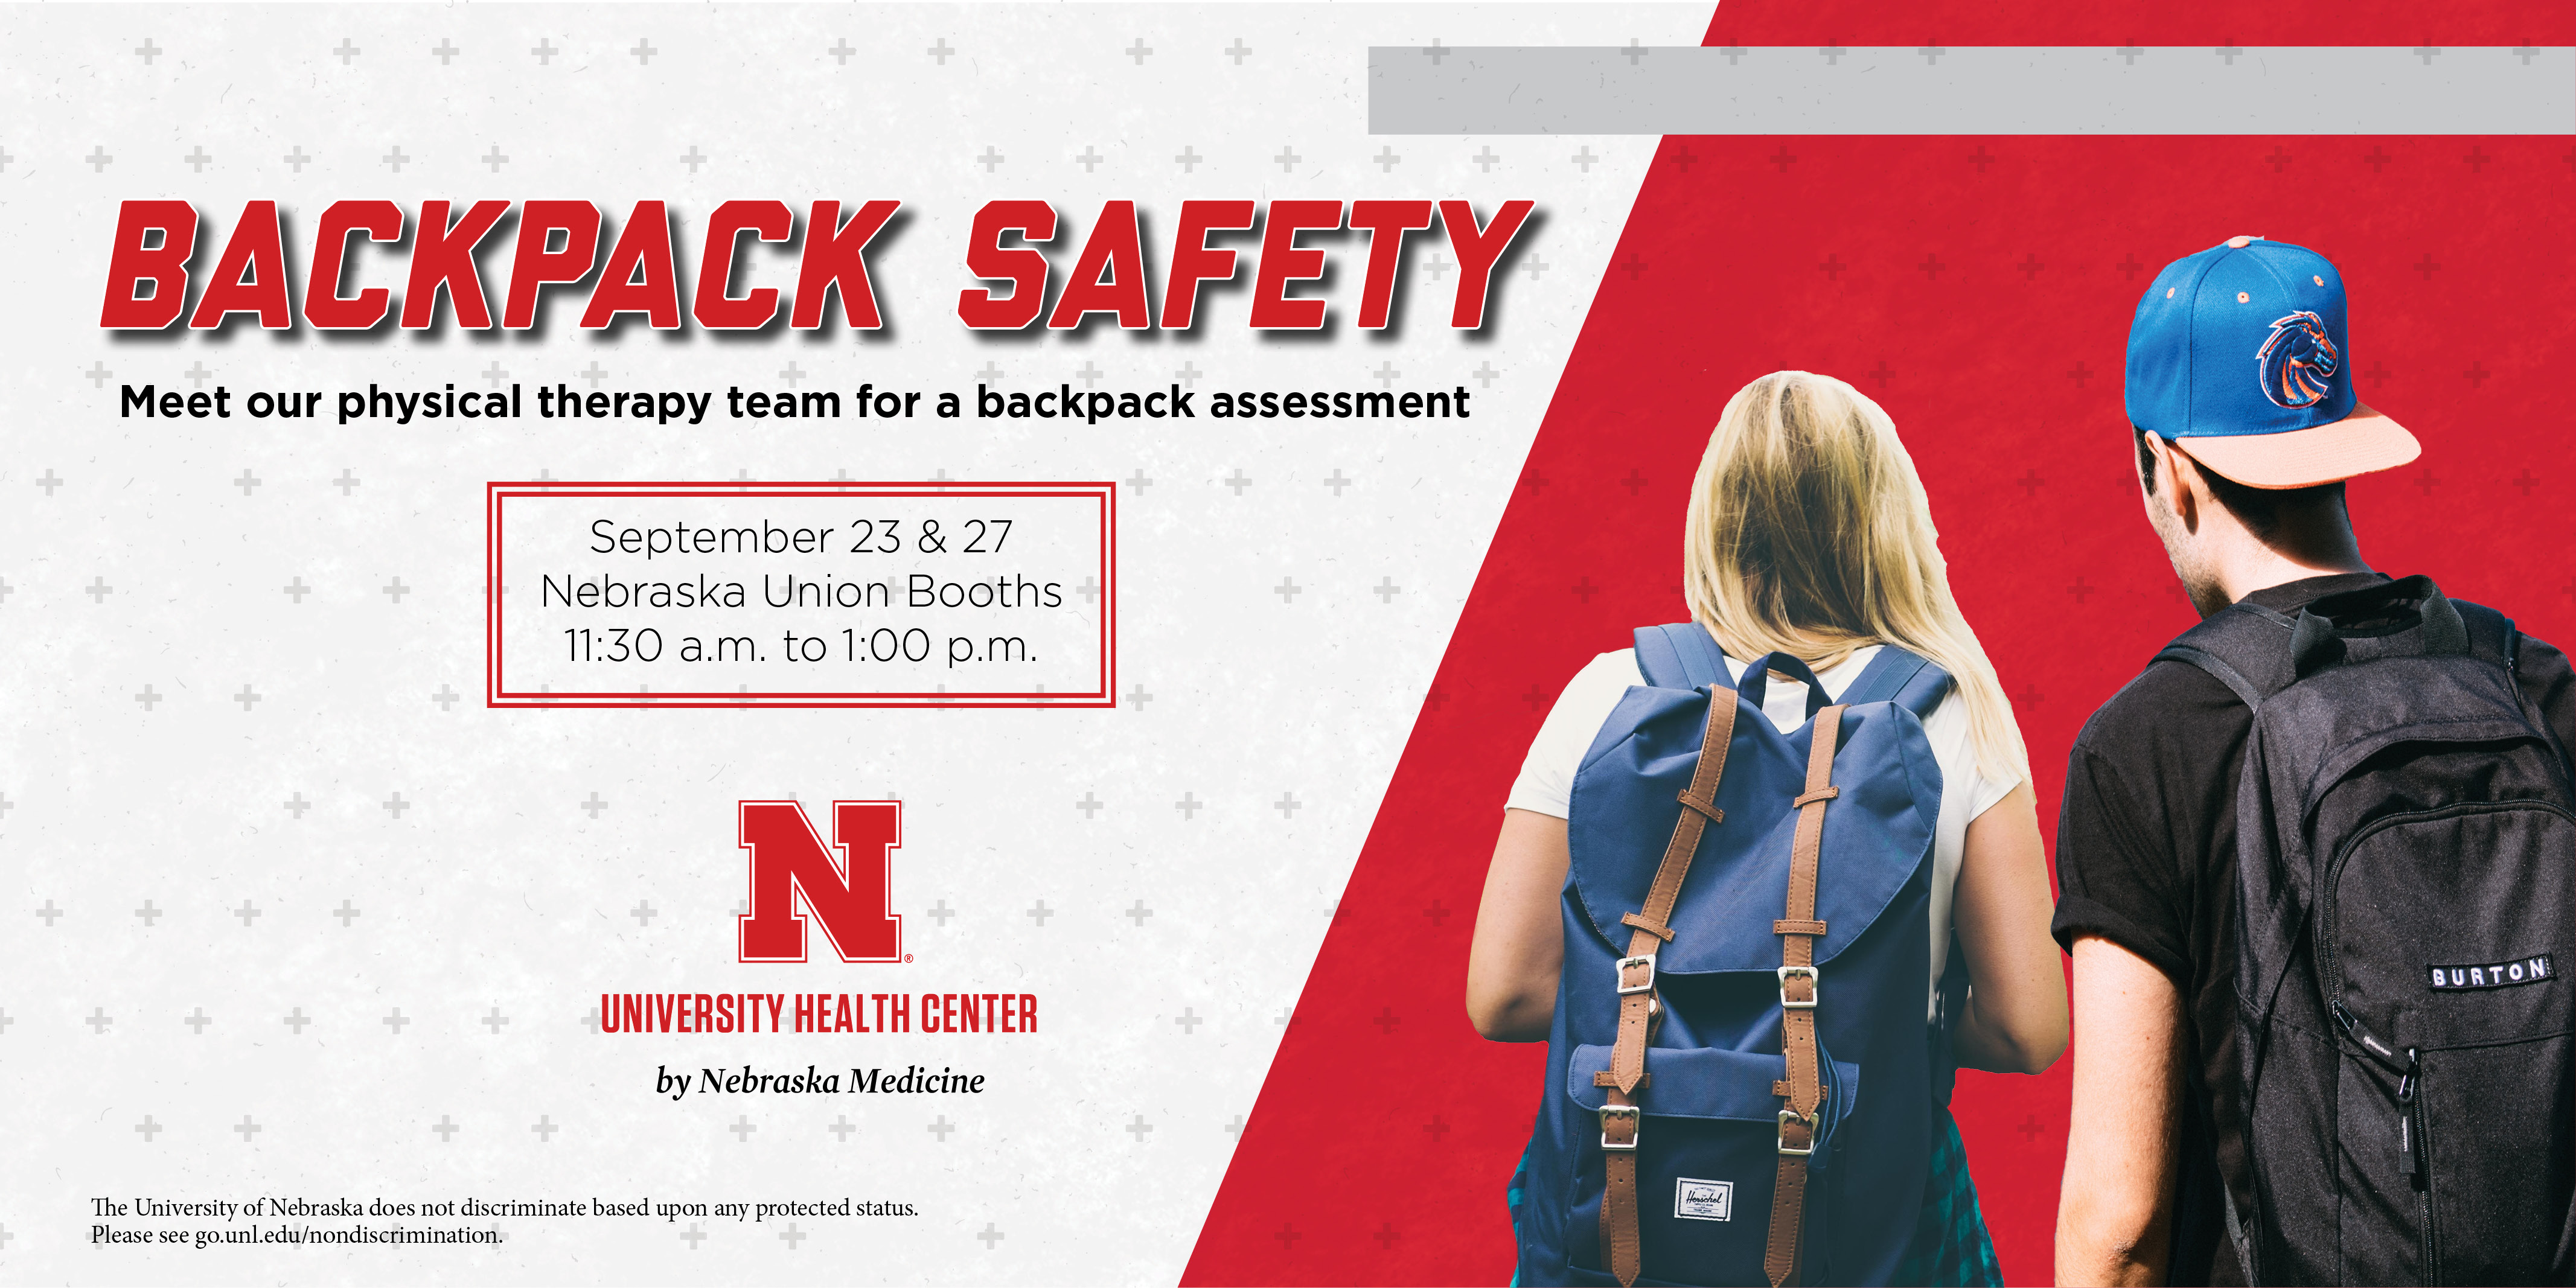 Backpack Safety Events